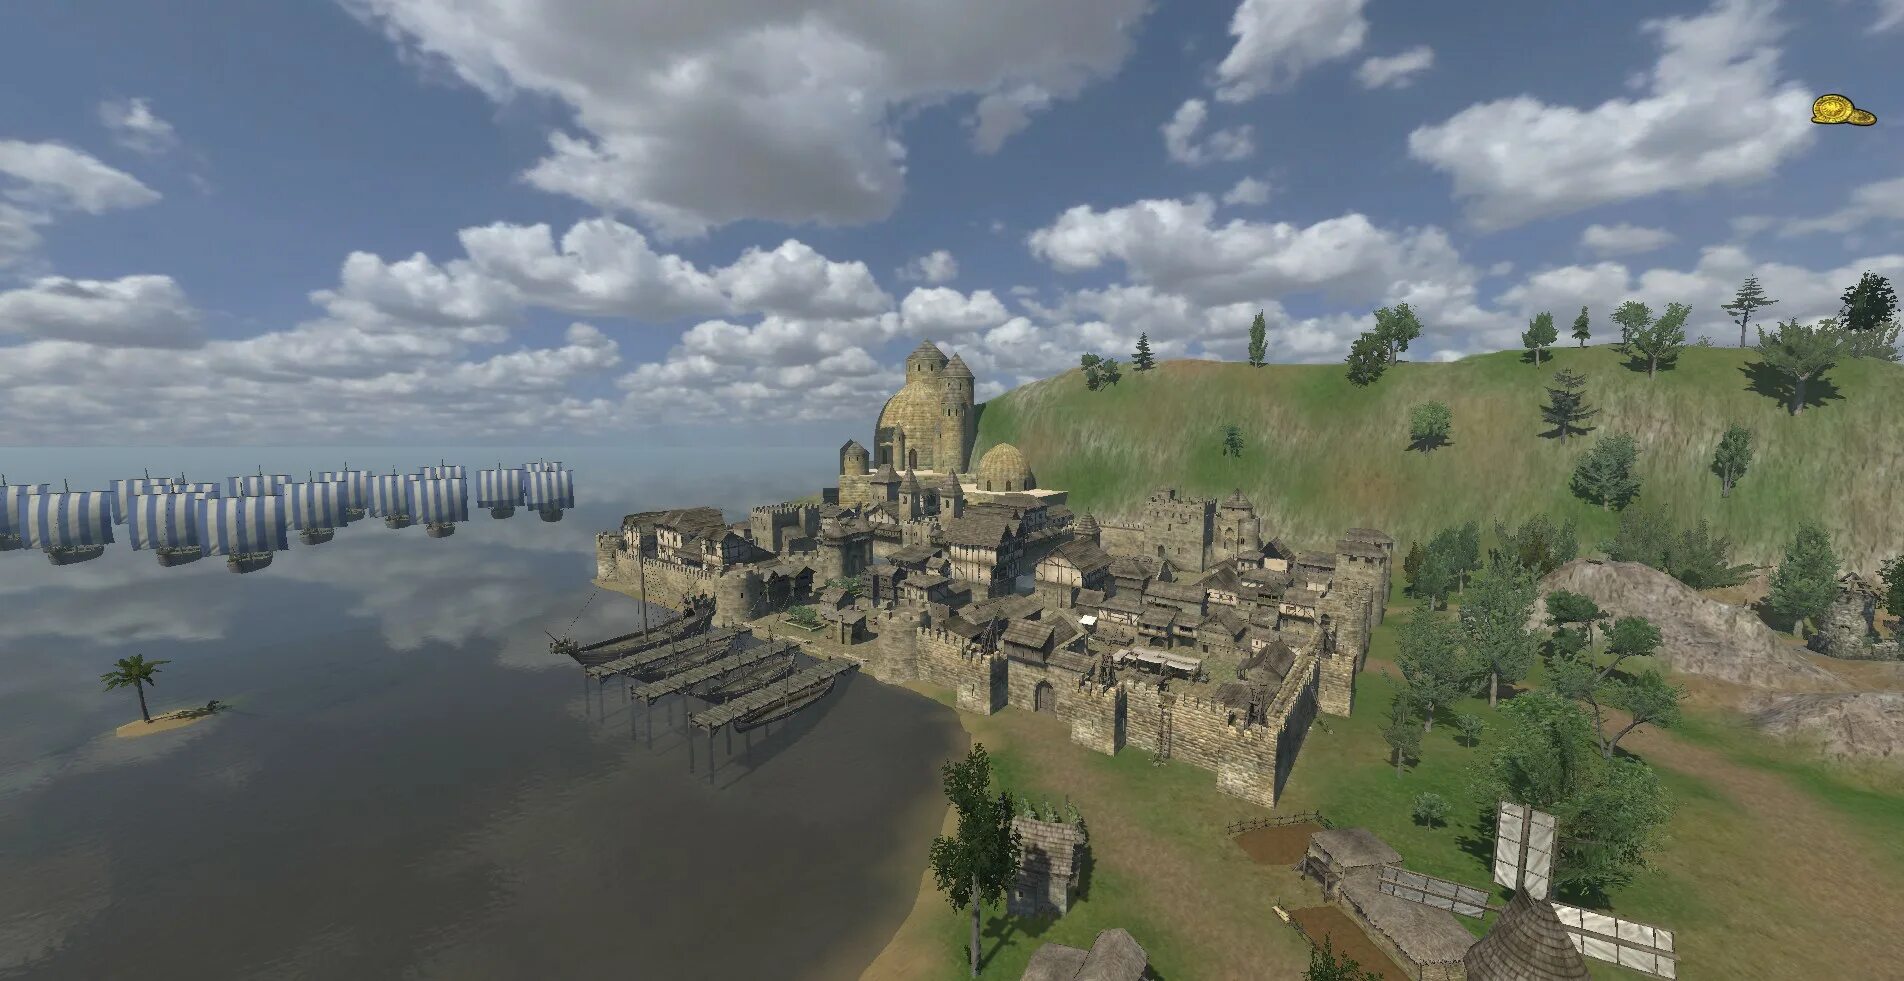 Mount & Blade "Gun-thunder1". Mount and Blade 3 город. Маунт энд блейд варбанд persistent World. Mount and Blade Warband города. Mount blade warband города